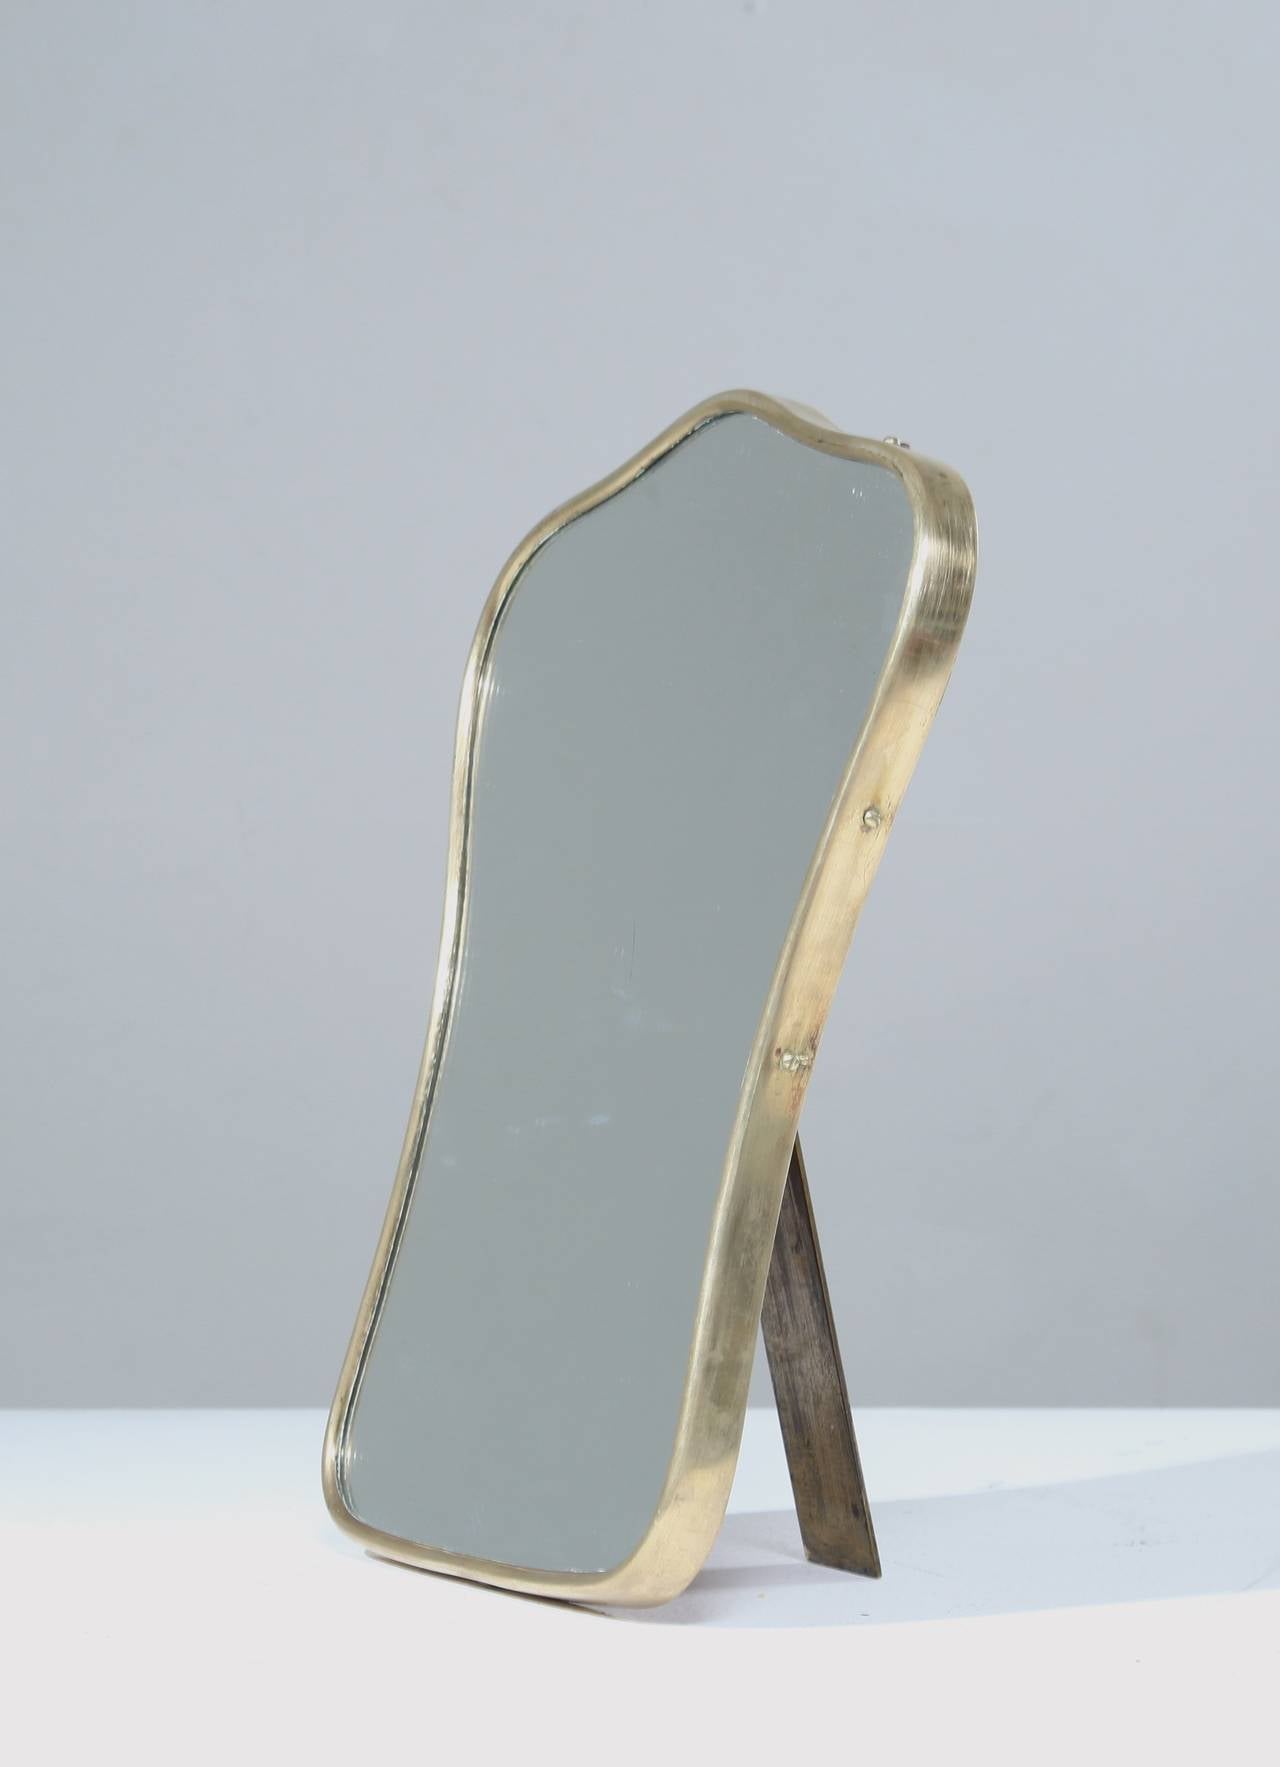 Brass framed table mirror with wooden back.
Simple, elegant and excellent condition.